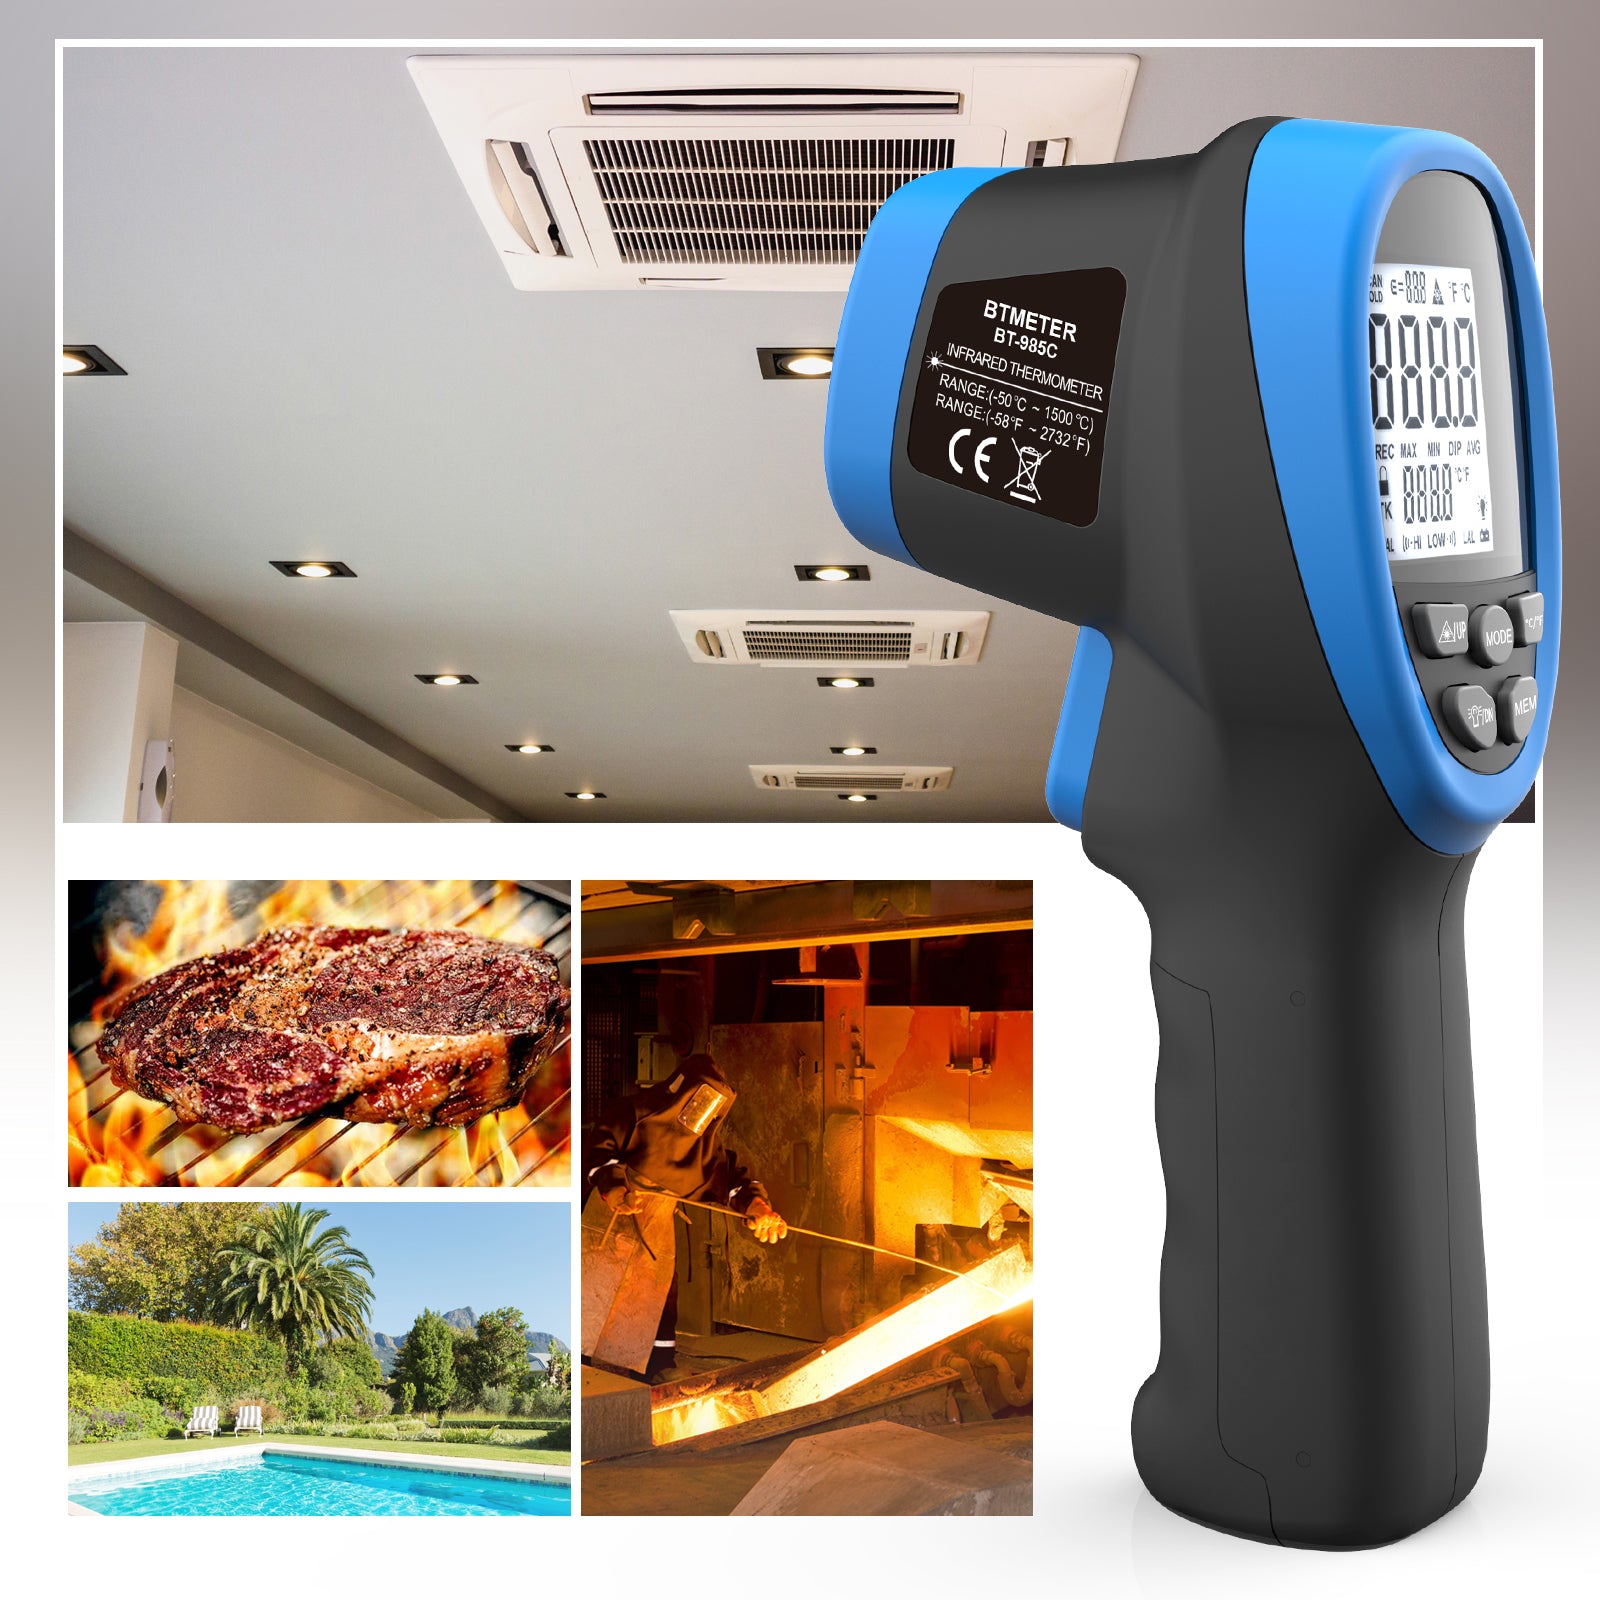  Infrared Thermometer, Digital IR Laser Thermometer